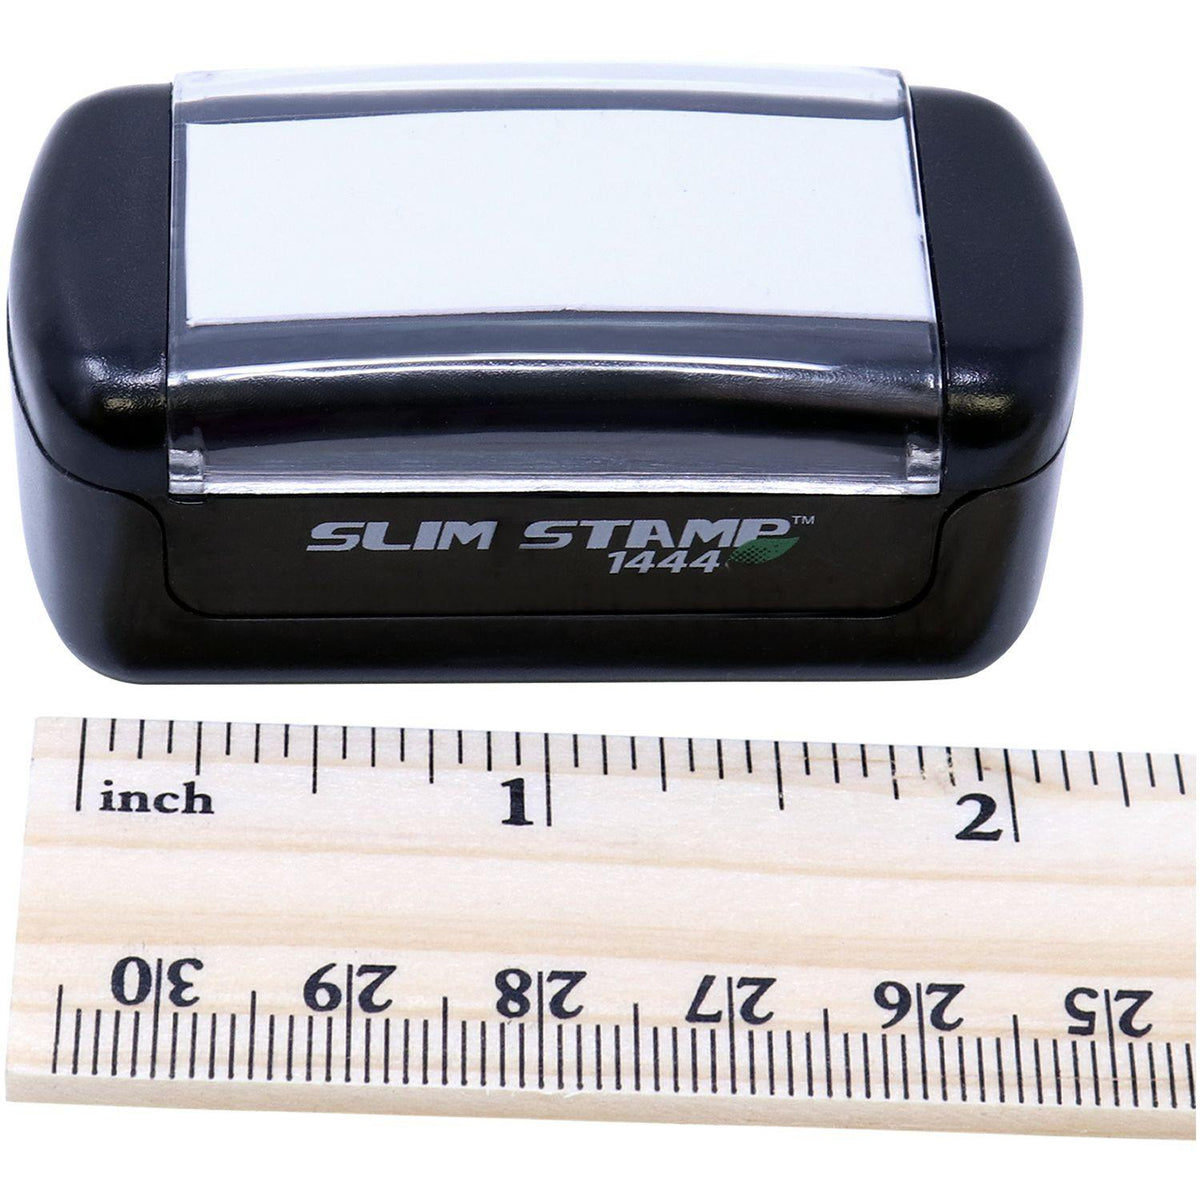 Measurement Slim Pre-Inked E-mailed with Date Box Stamp with Ruler